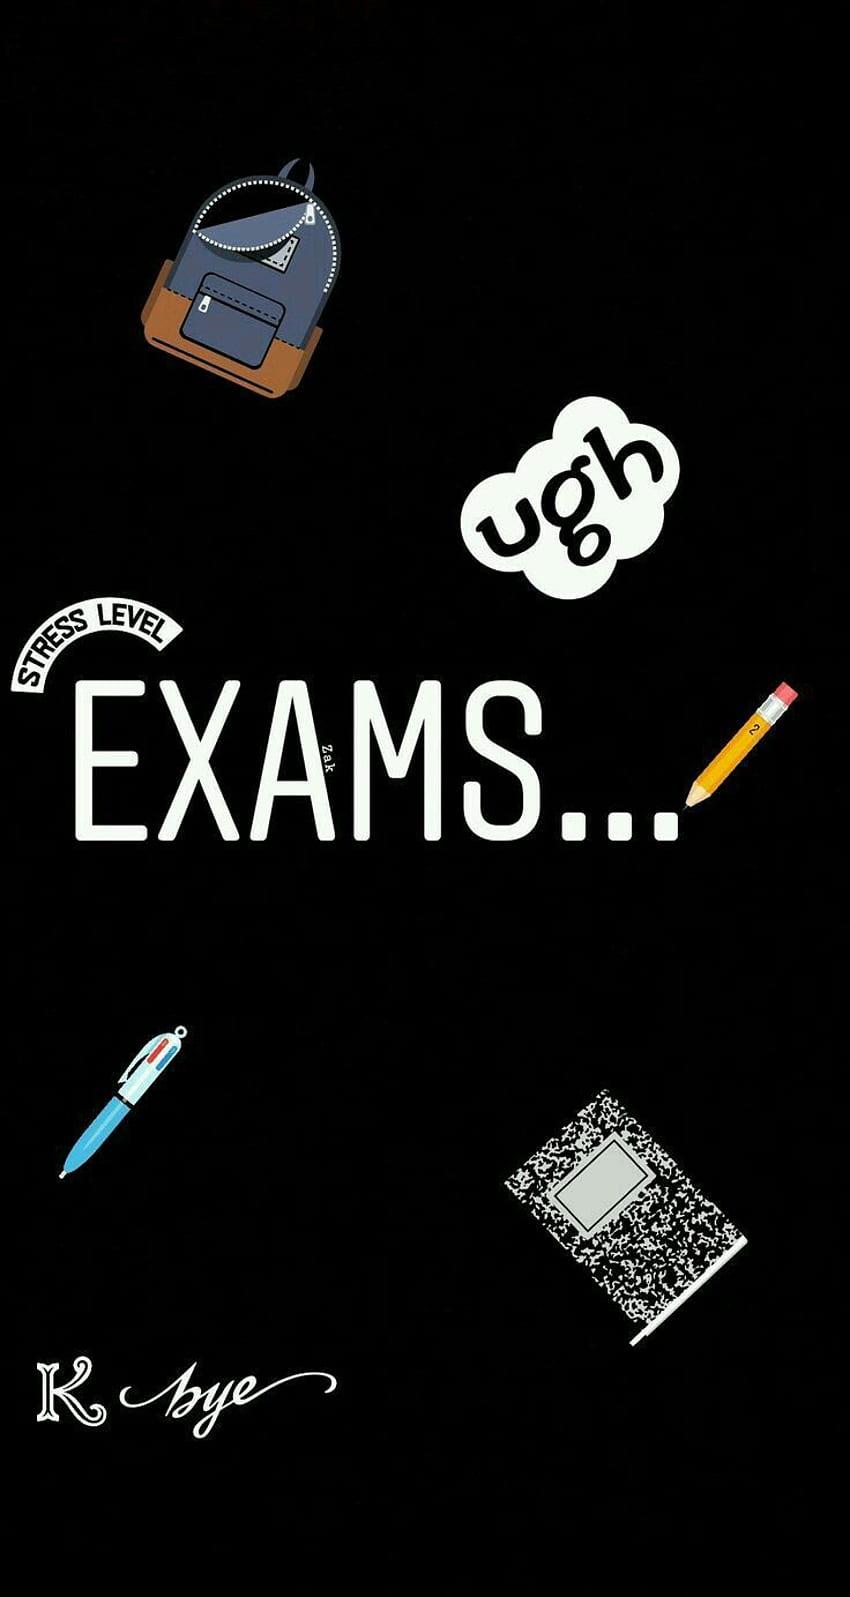 ٥Aғѕнд. Exam quotes funny, Exam quotes, Exam dp for whatsapp HD ...